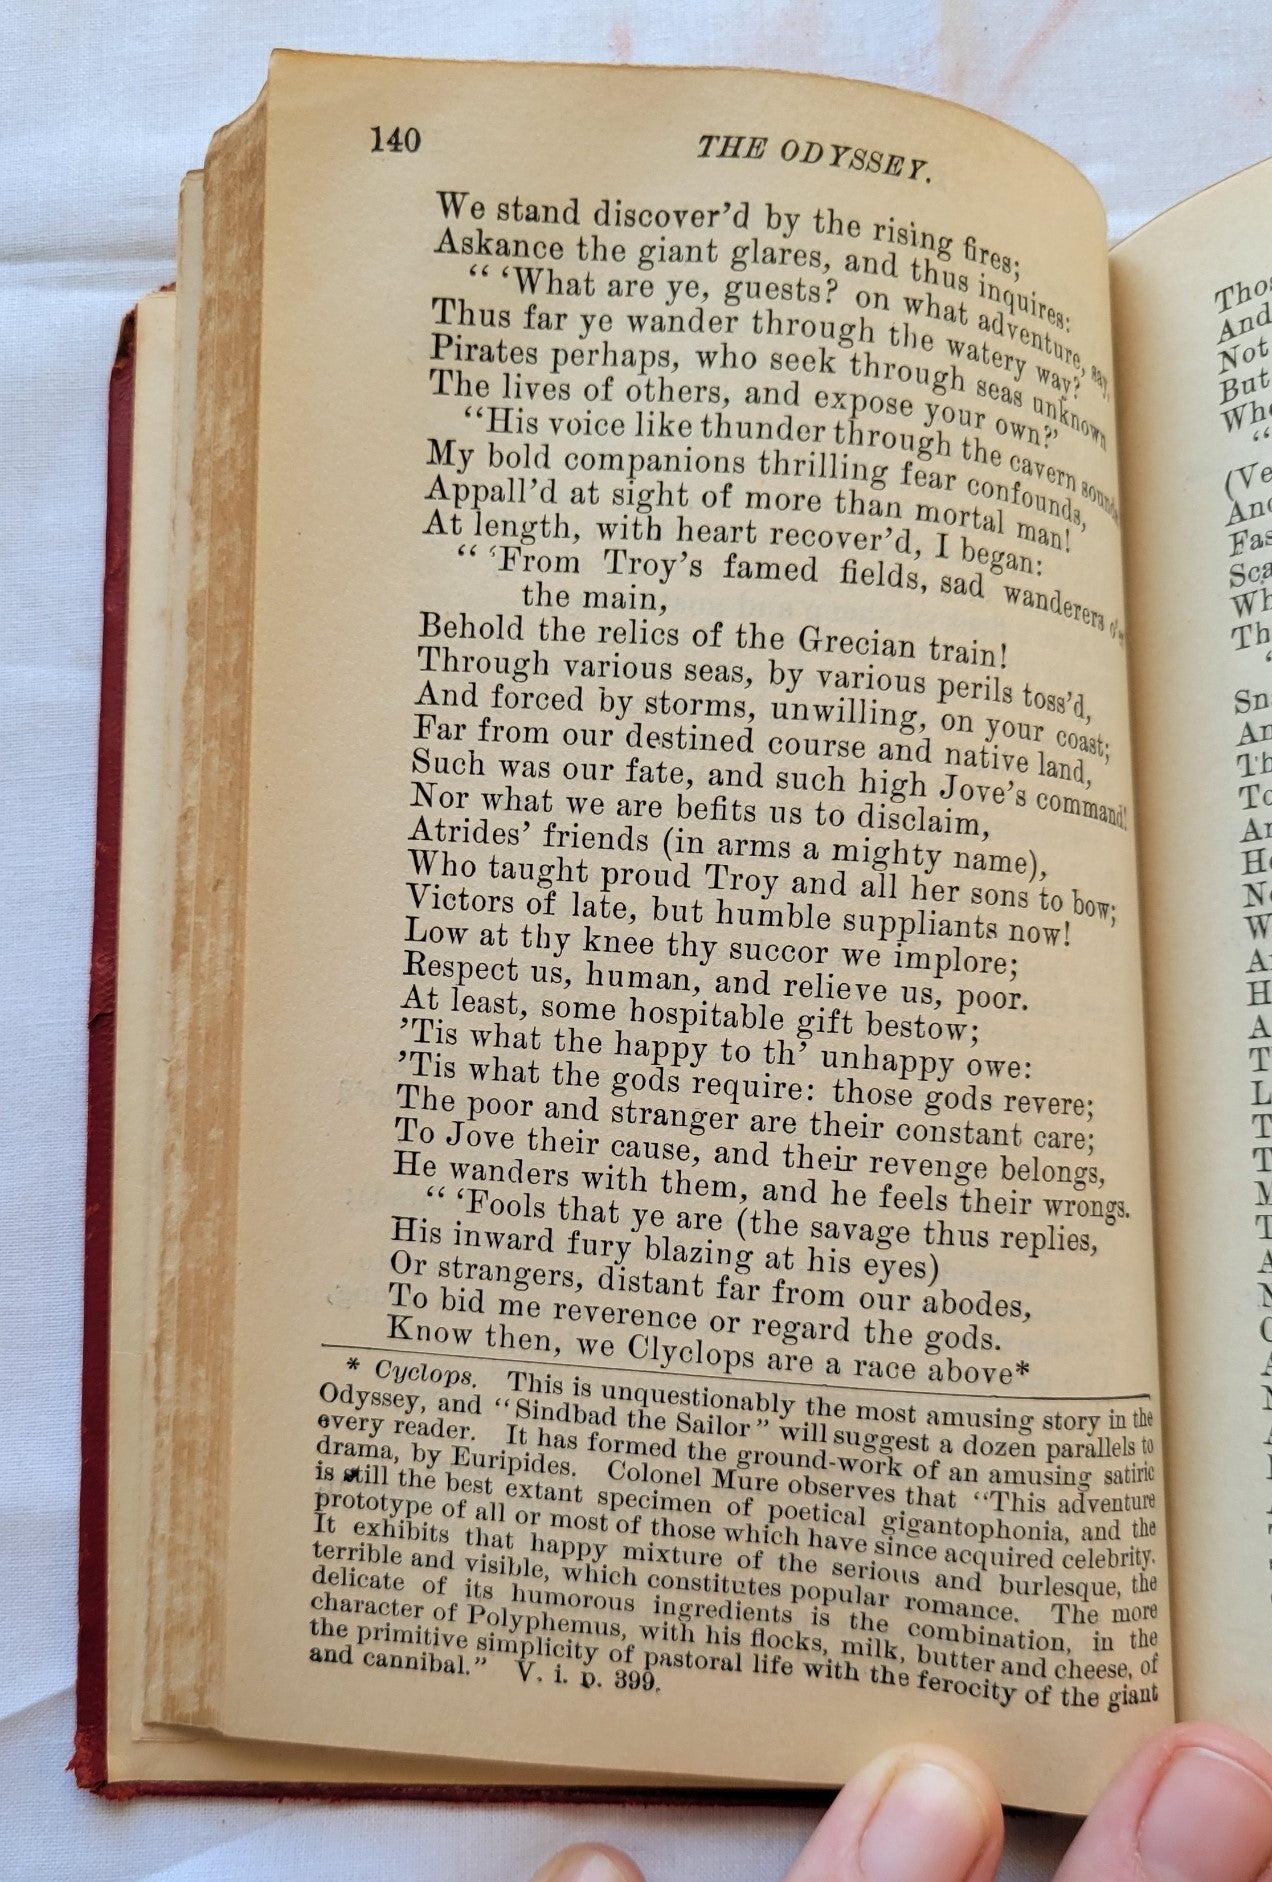 Antique book for sale, Homer's ancient Greek epic, The Odyssey translated by Alexander Pope, published by A. L. Burt Company (before 1932), with notes from Rev. Theodore Alois Buckley M.A. View of page 140